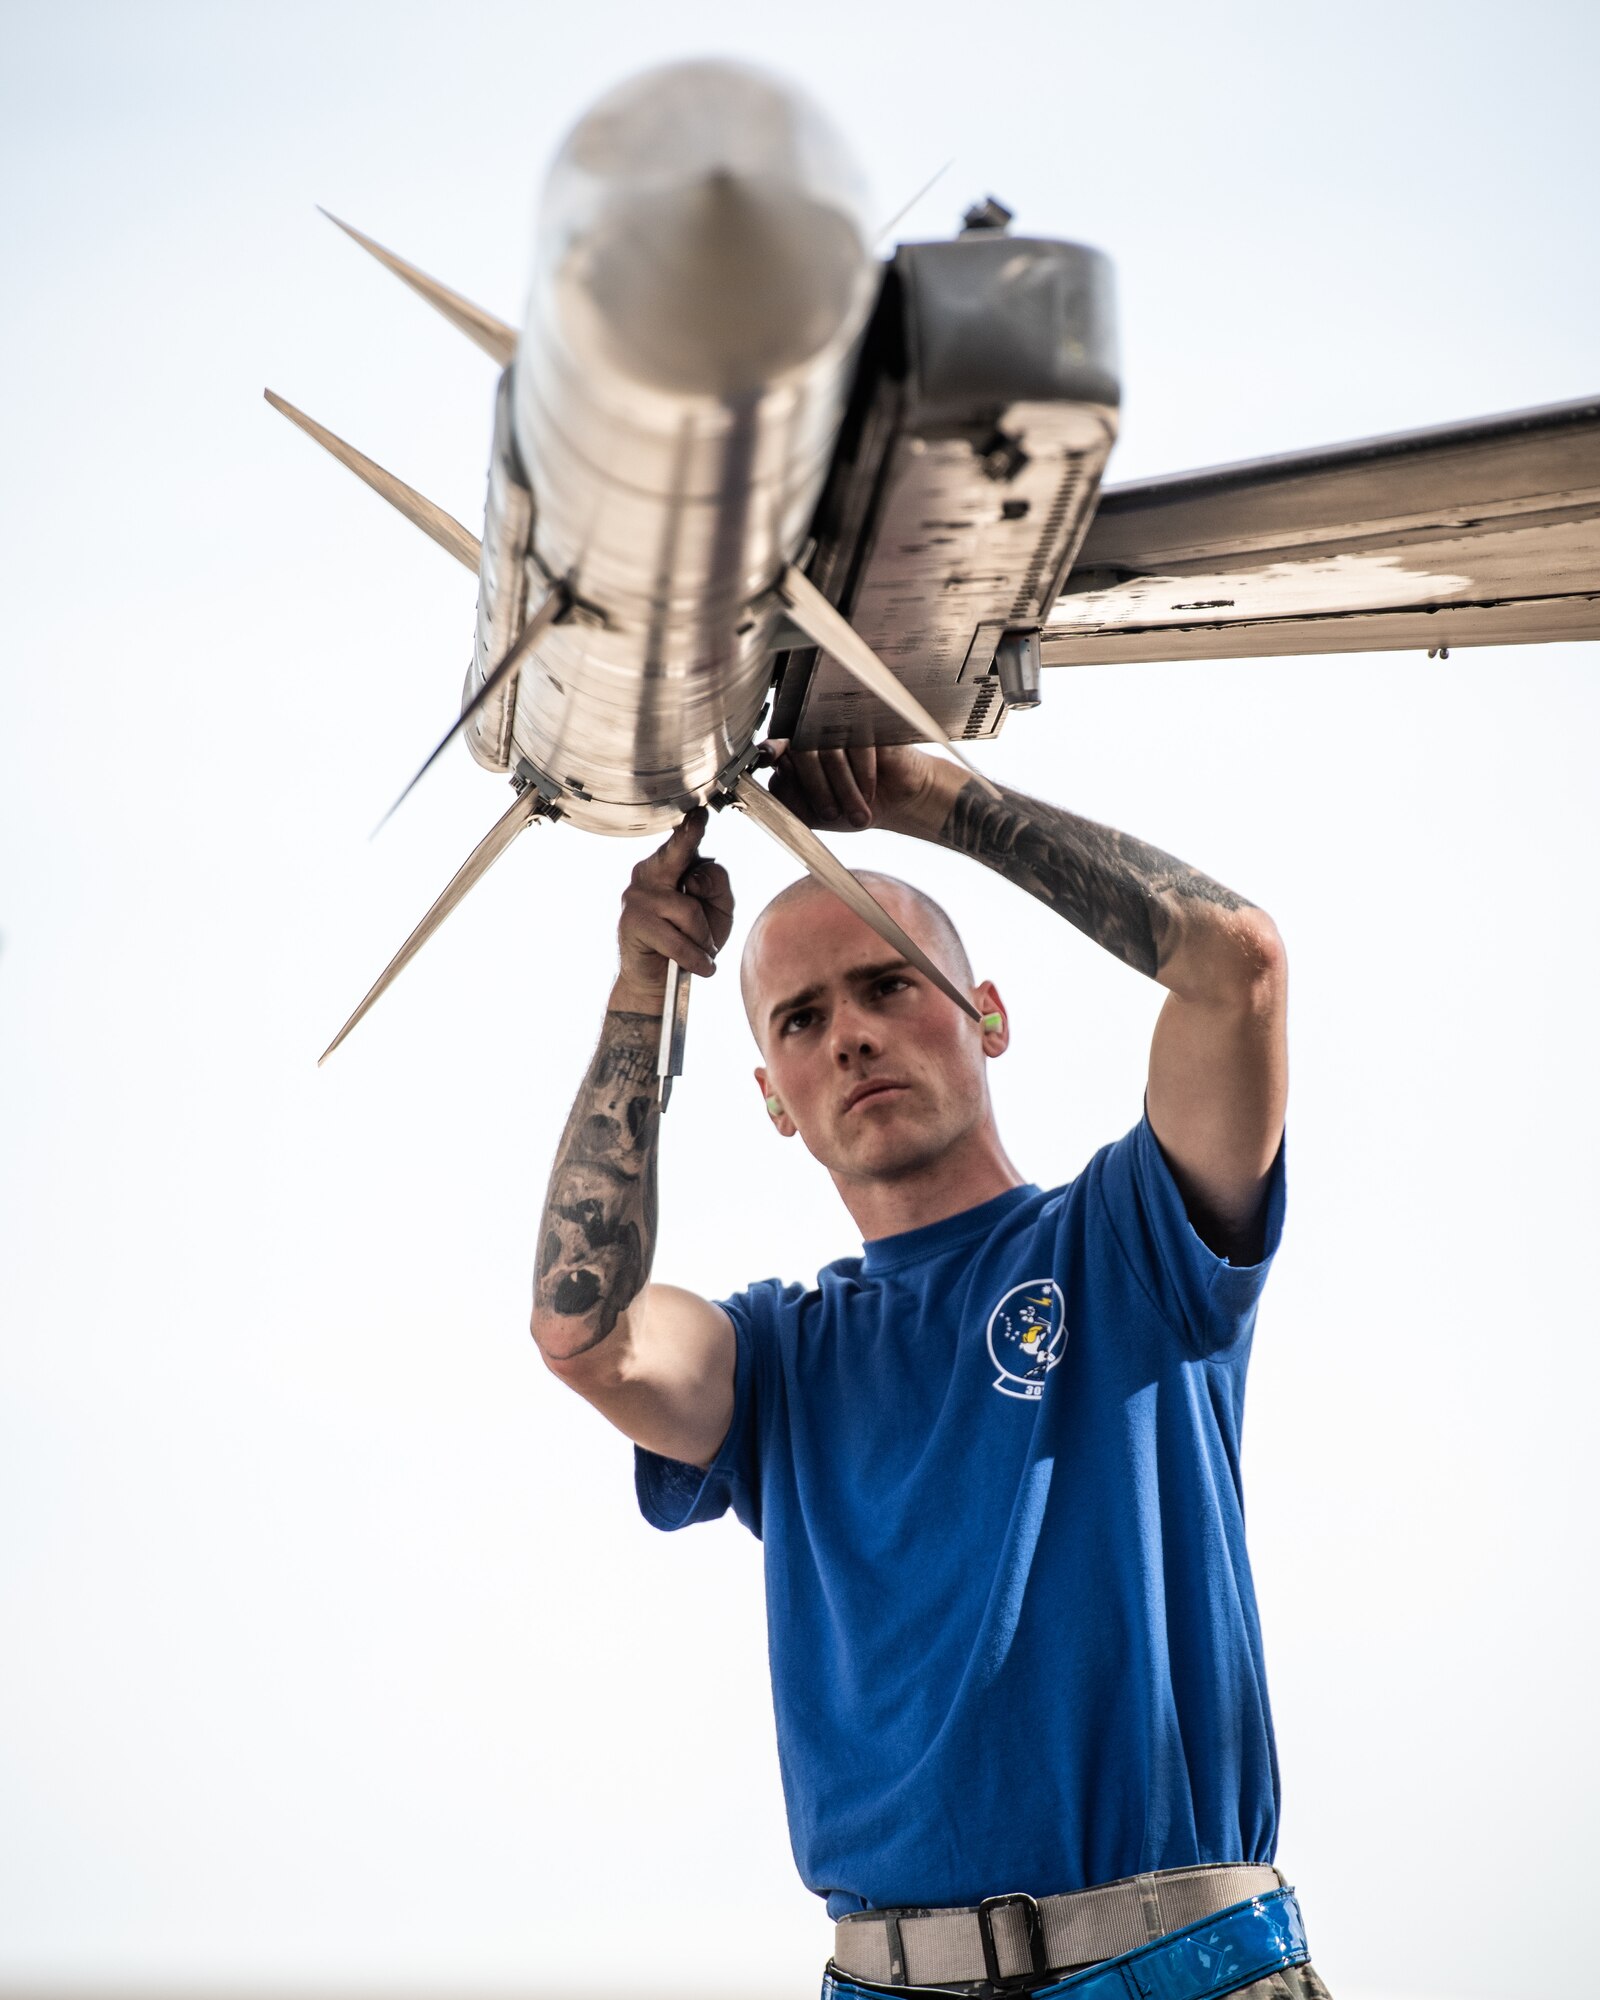 Senior Airman Sean Warden, 309th Aircraft Maintennance Squadron, weapons load crew member, inspects an AIM-120 missle during an Annual Load Crew Competition Jan. 24, 2020, at Luke Air Force Base, Ariz.